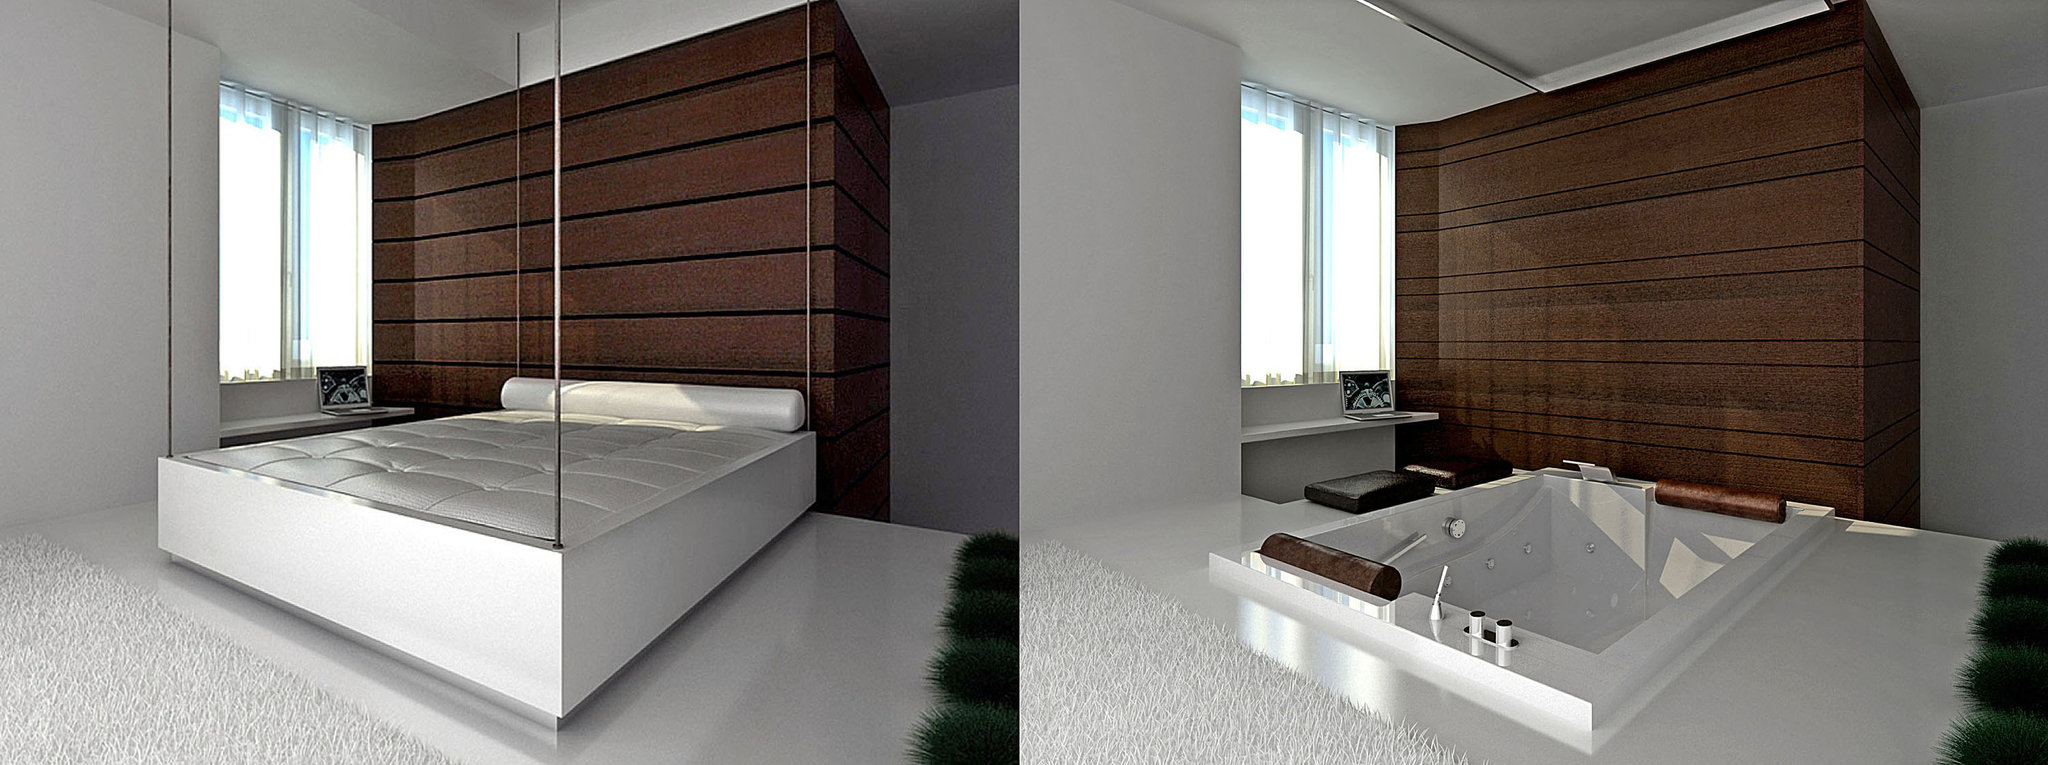 a bed that disappears to reveal a bath